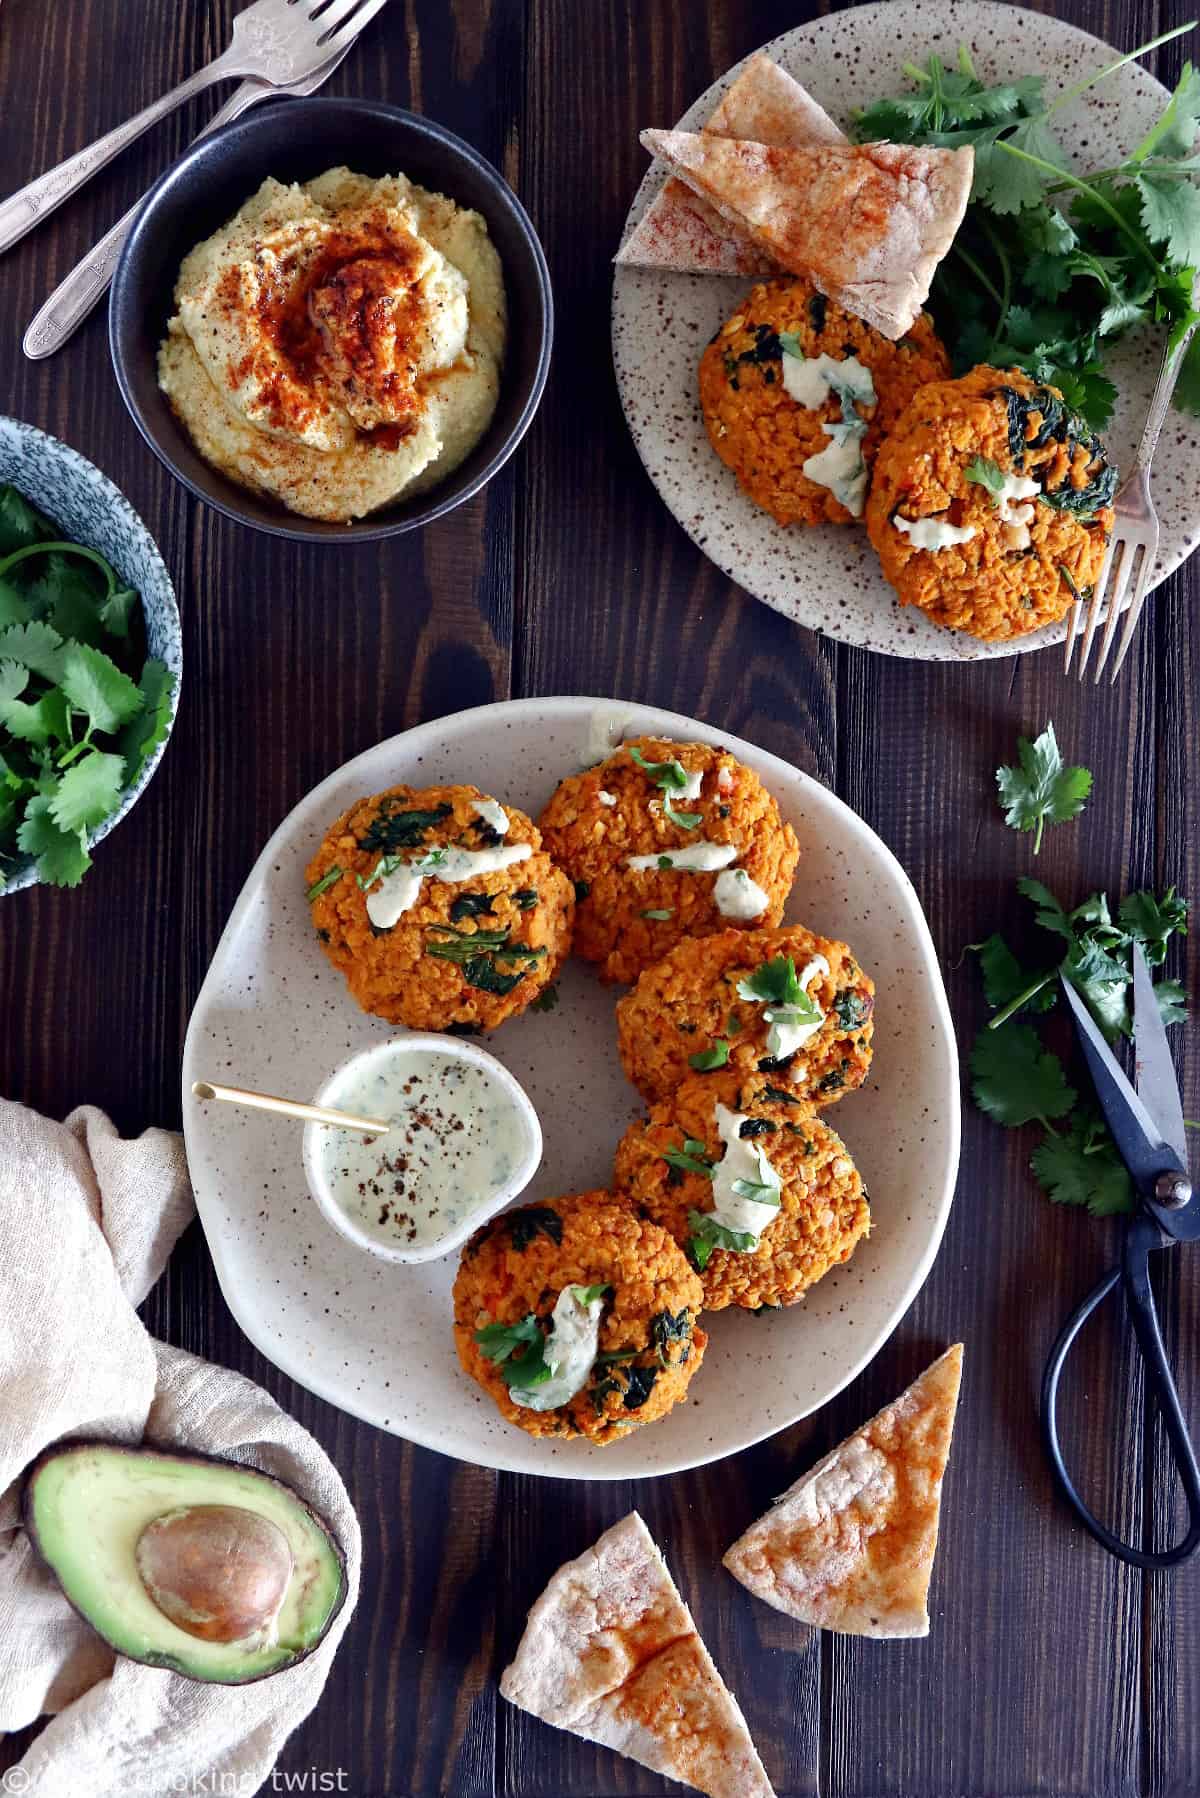 Easy and delicious red lentil patties served with a garlic-herb tahini sauce. Both vegan and gluten-free, these veggie patties are bursting with savory flavors, hearty texture, and oodles of plant-based protein.